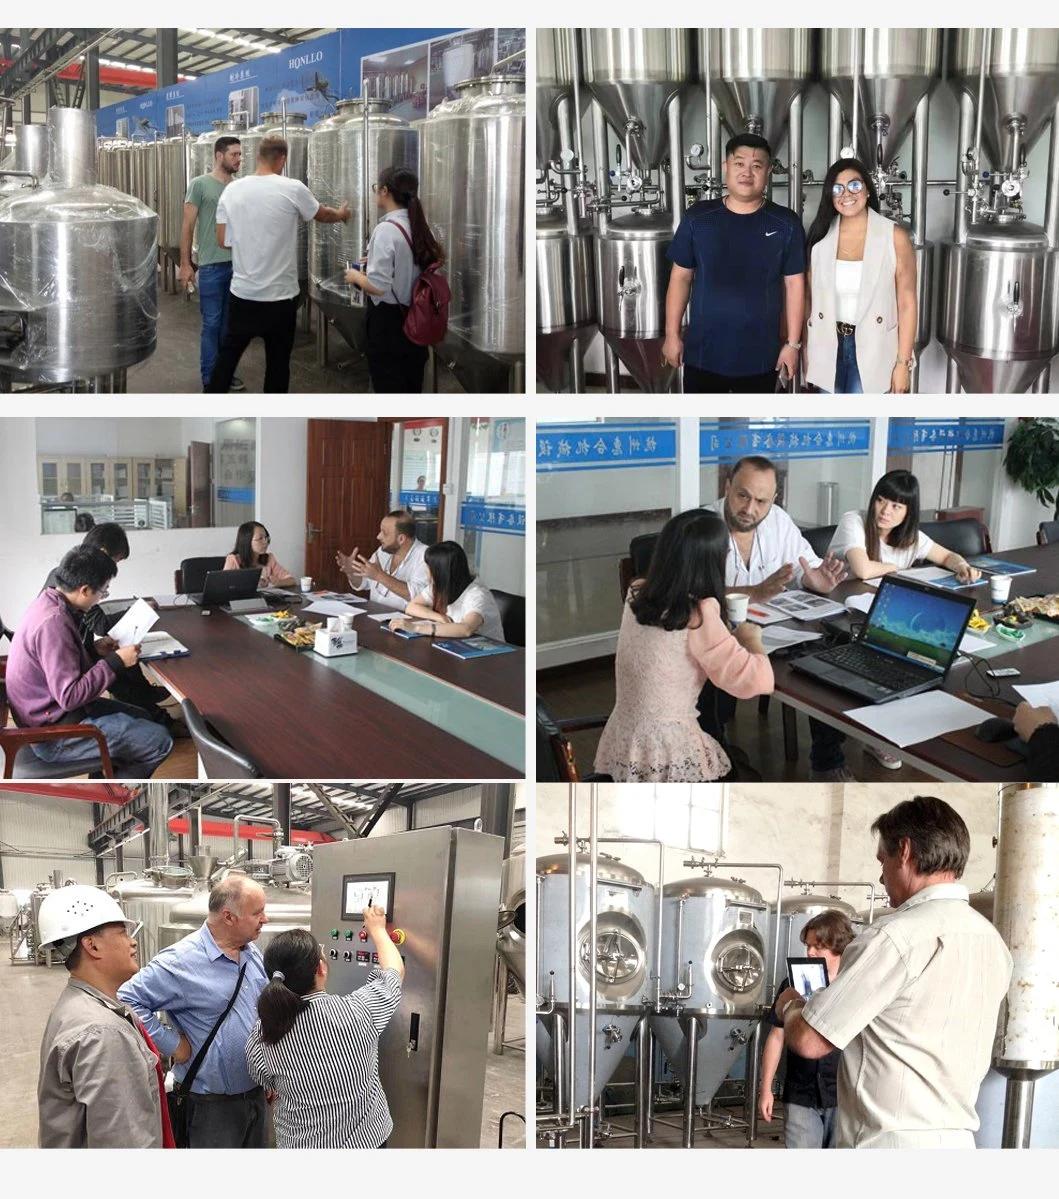 Food Grade Stainless Steel Beer Brewing Equipment with Dimple Jacket